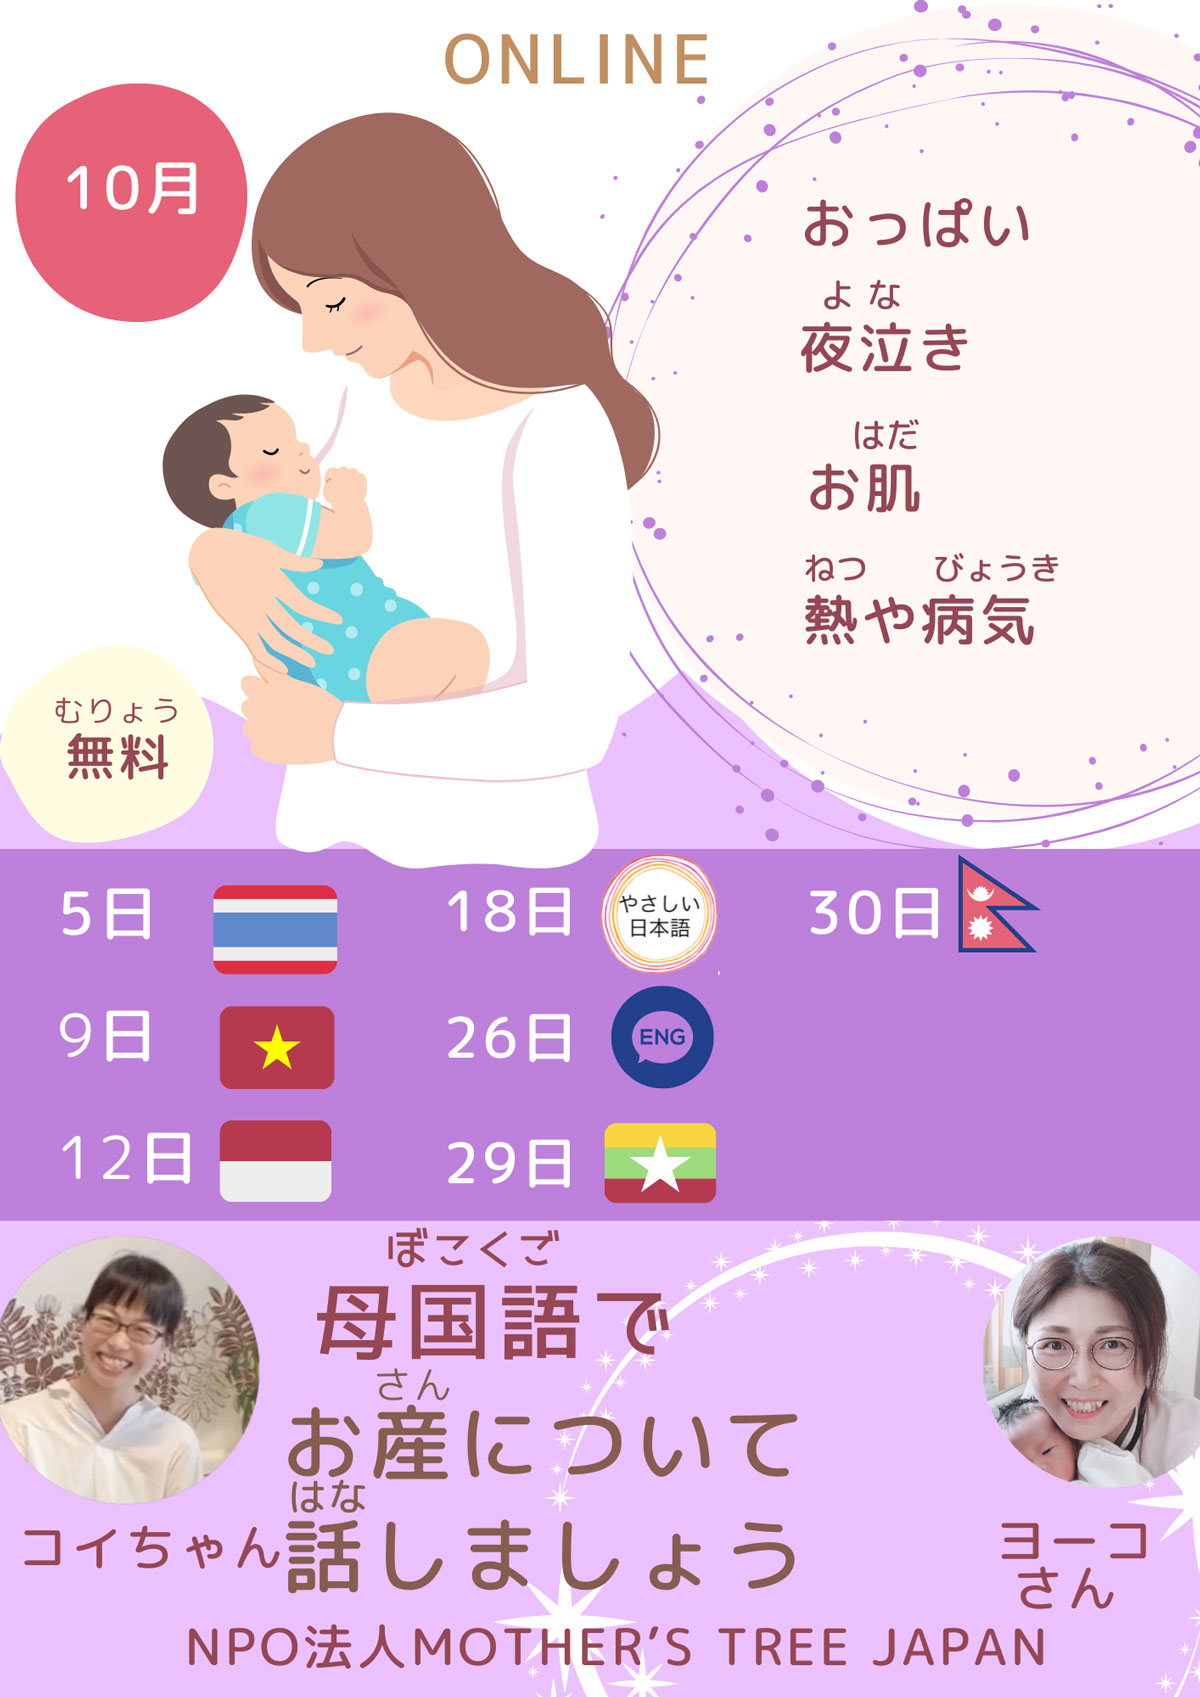 Let's talk about pregnancy and childbirth in your native language